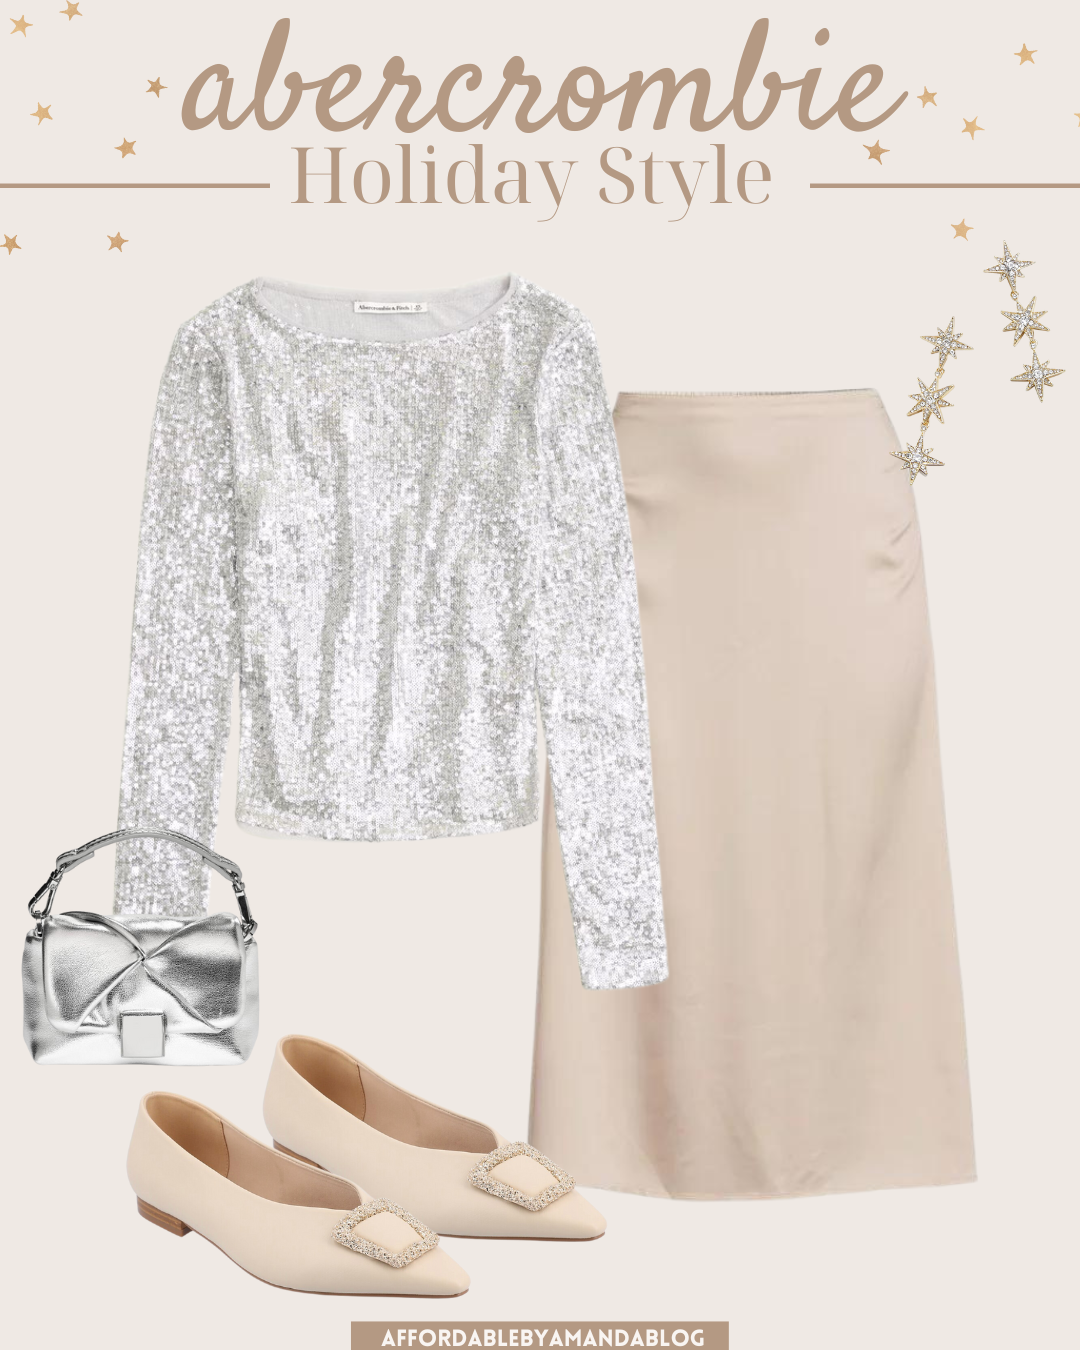 Long-Sleeve Sequin Boatneck Top with a Satin Slip Skirt Outfit for the Holidays